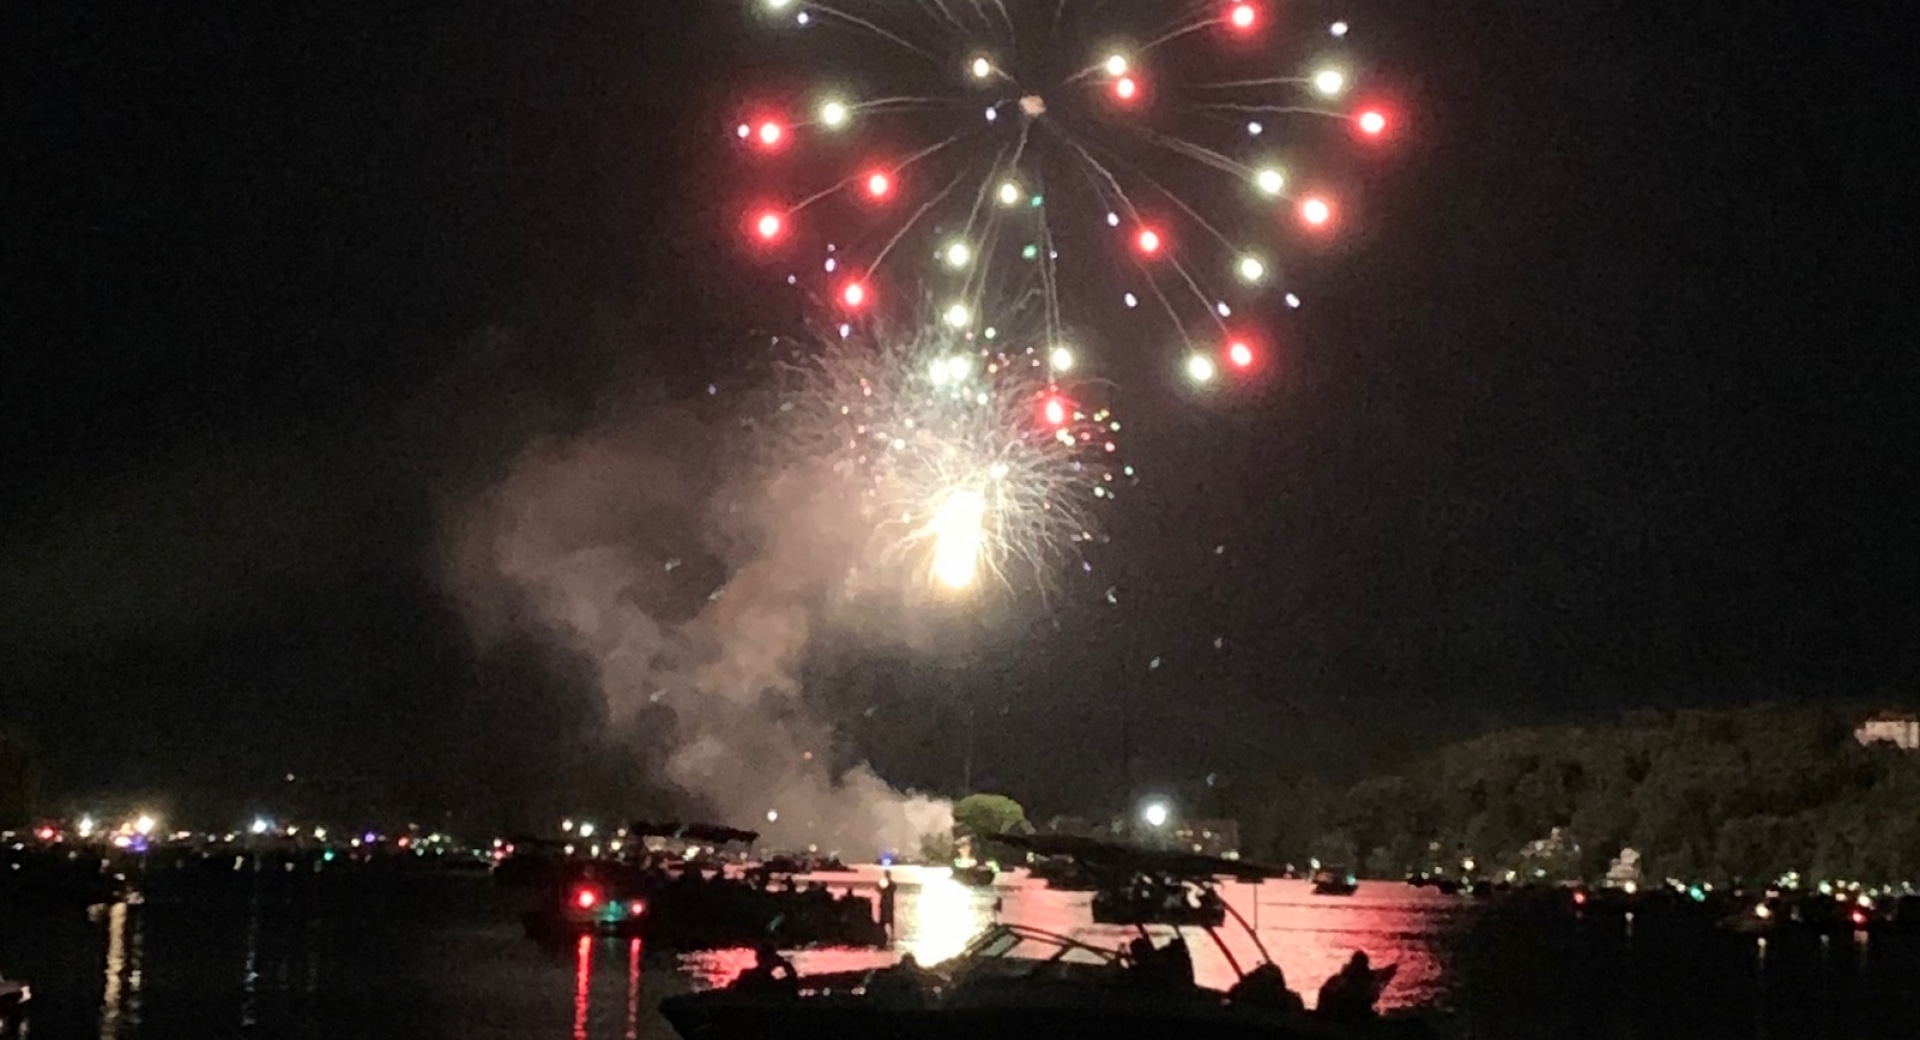 Cancelled - 2021 Danbury 4th of July Fireworks over the Lake